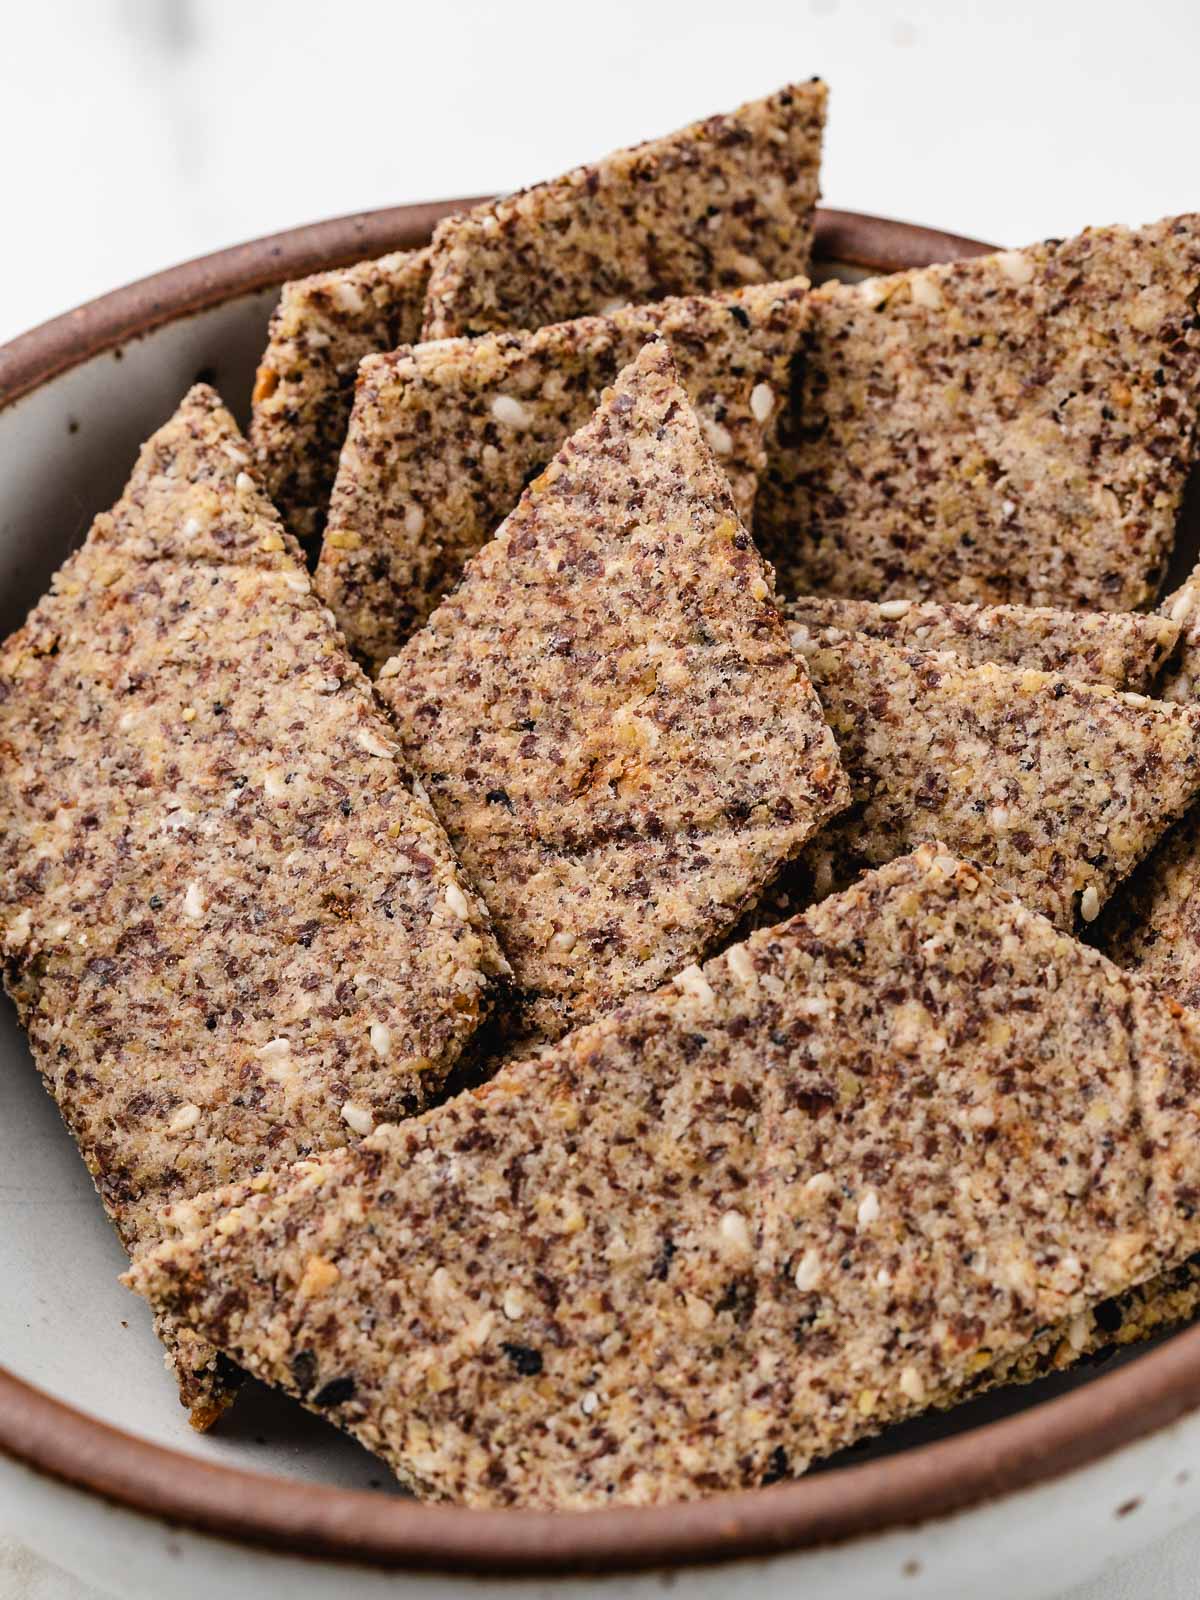 Grain free crackers in a bowl.